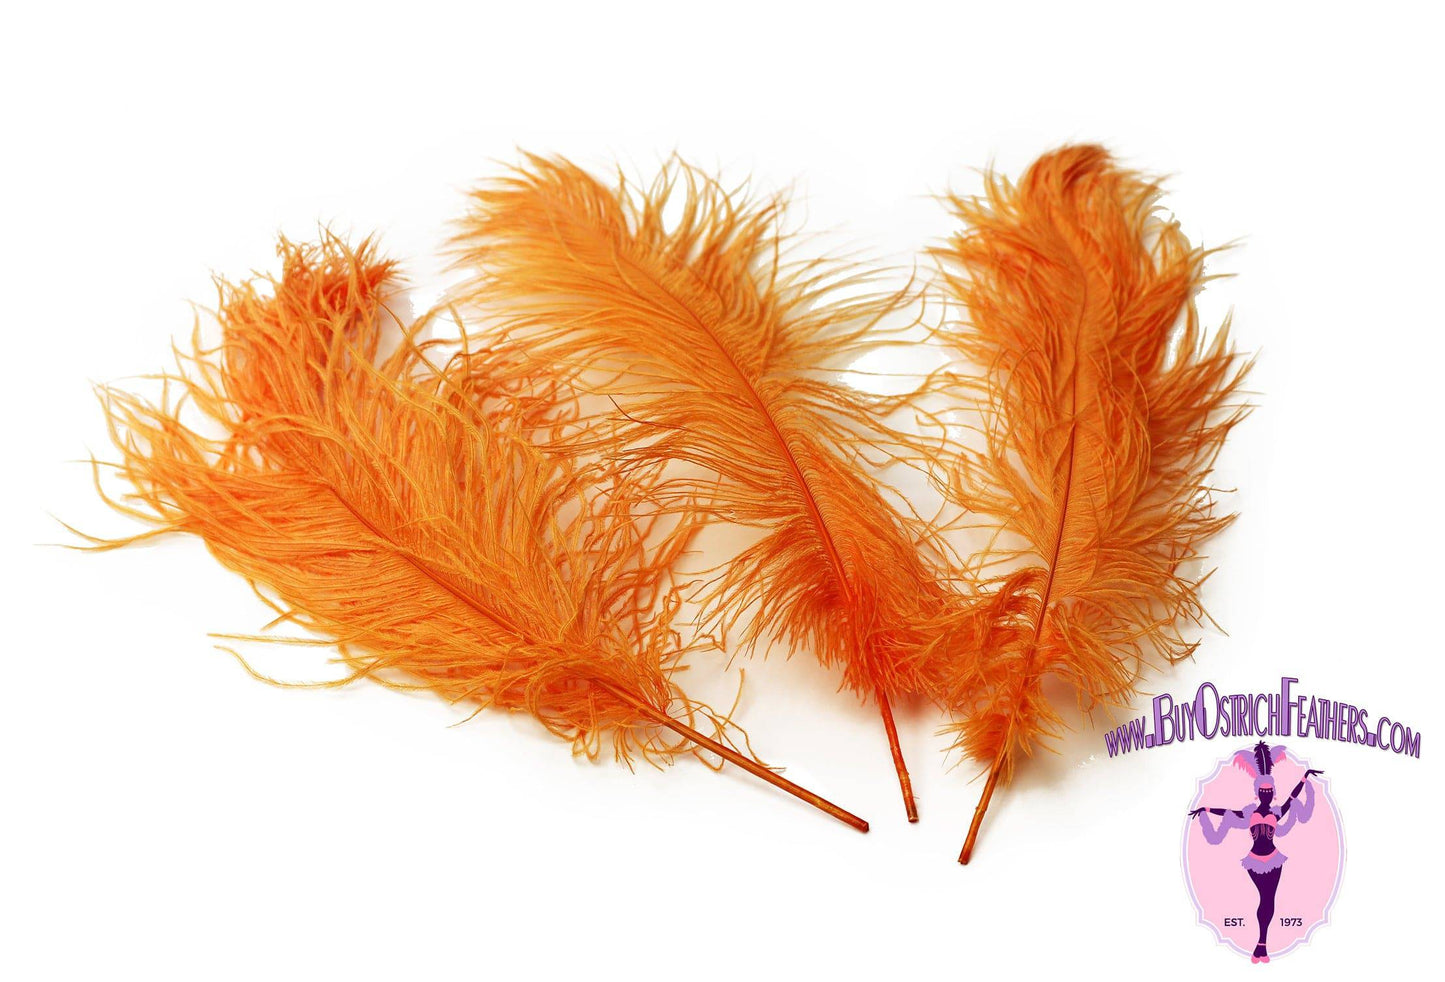 Ostrich Feather Tail Plumes 9-12" (Orange) - Buy Ostrich Feathers